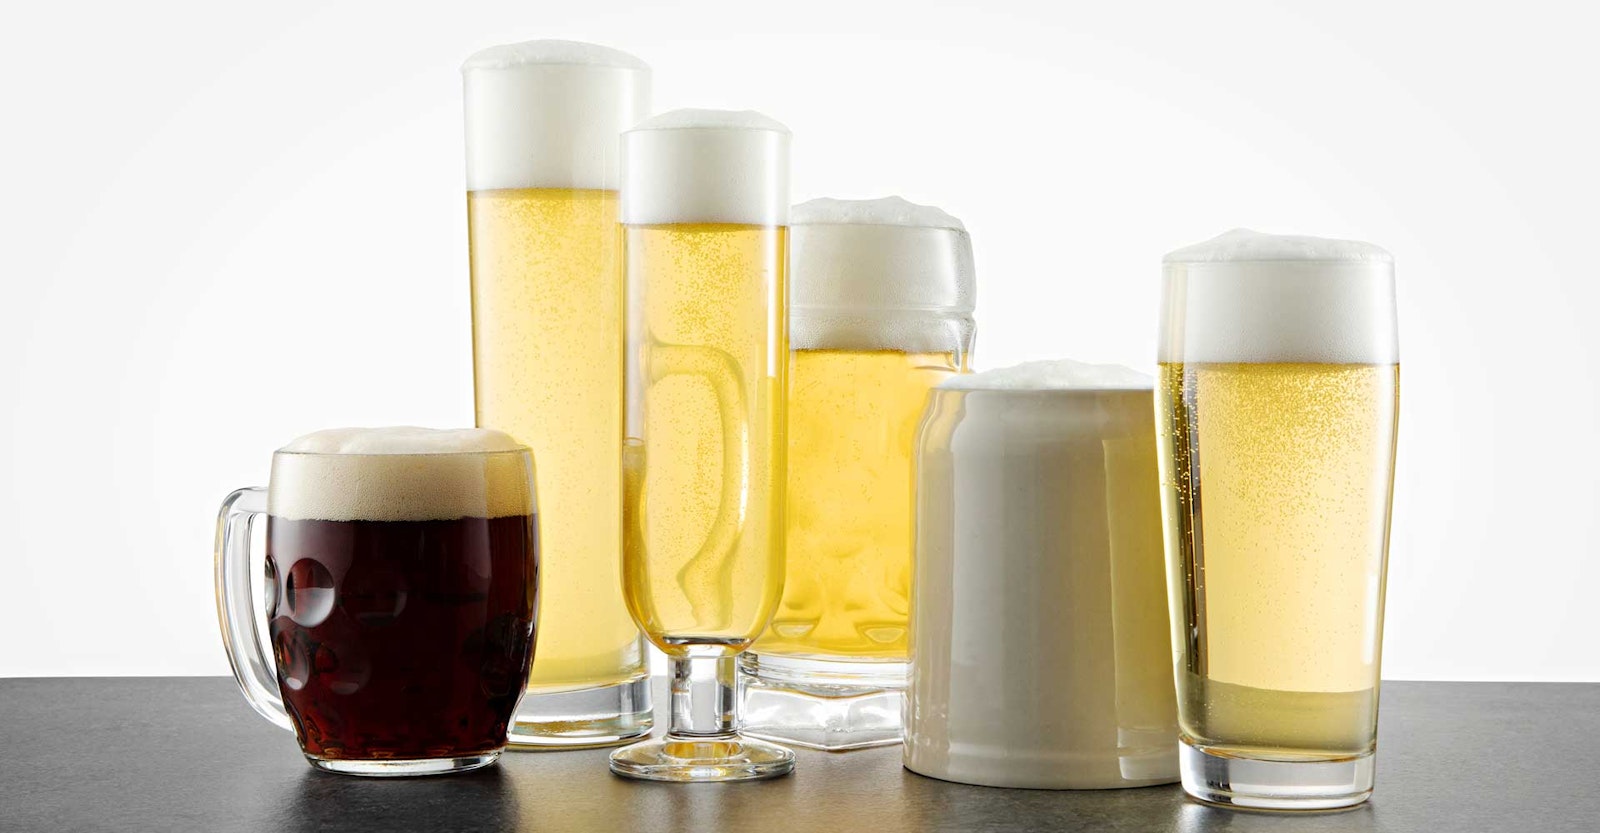 Beer glassware guide: beer glasses and why